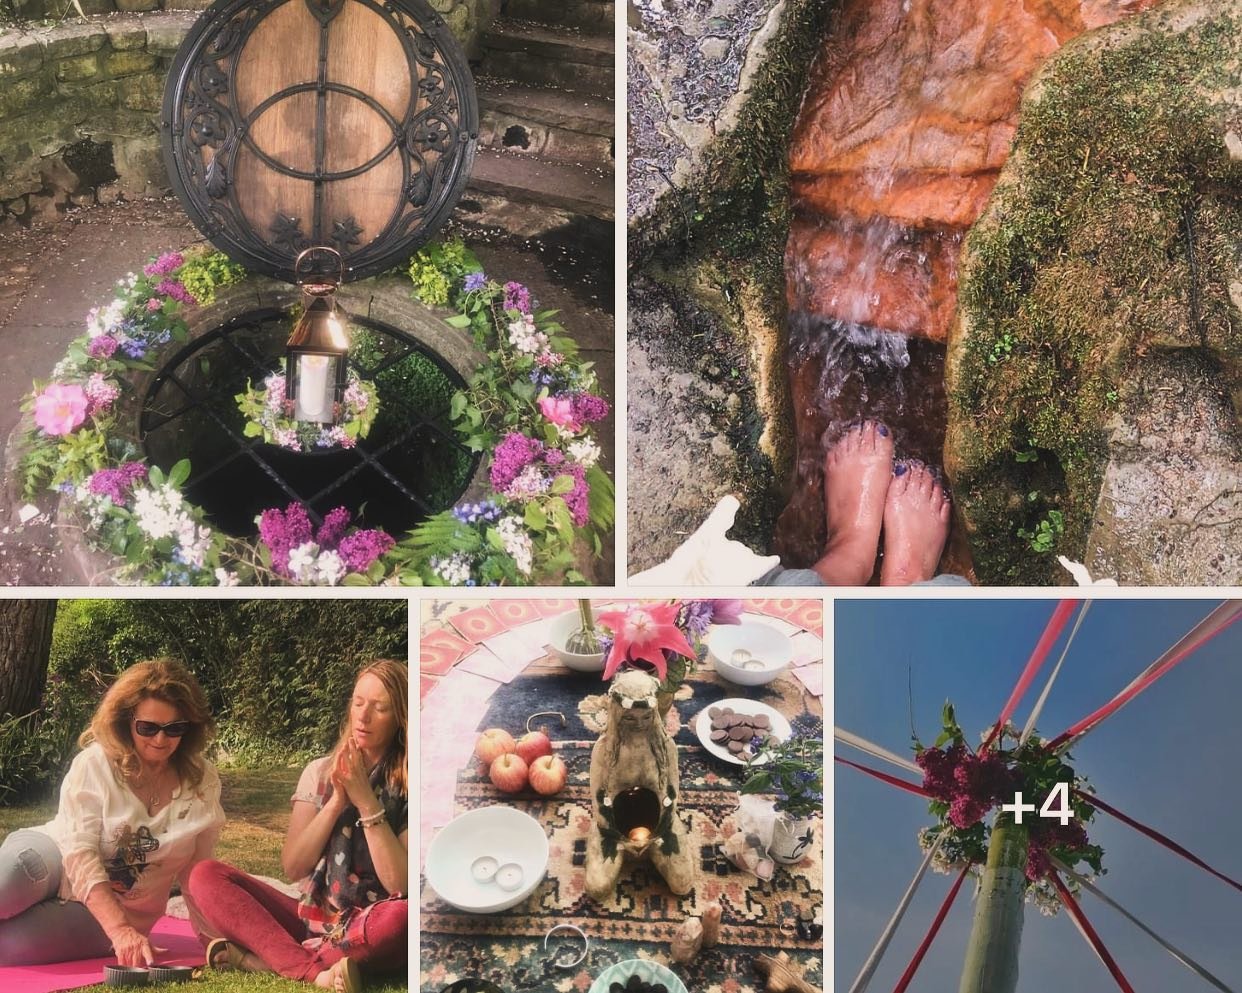 Memories of  our Beltane Retreat at @chalicewellshop 2 years ago ⚜️🌹

Such a peaceful sanctuary in the private gardens of Avalon to host a beautiful group of rose 🌹women 

Looking forward to returning for Earth Season in September to hold the next 